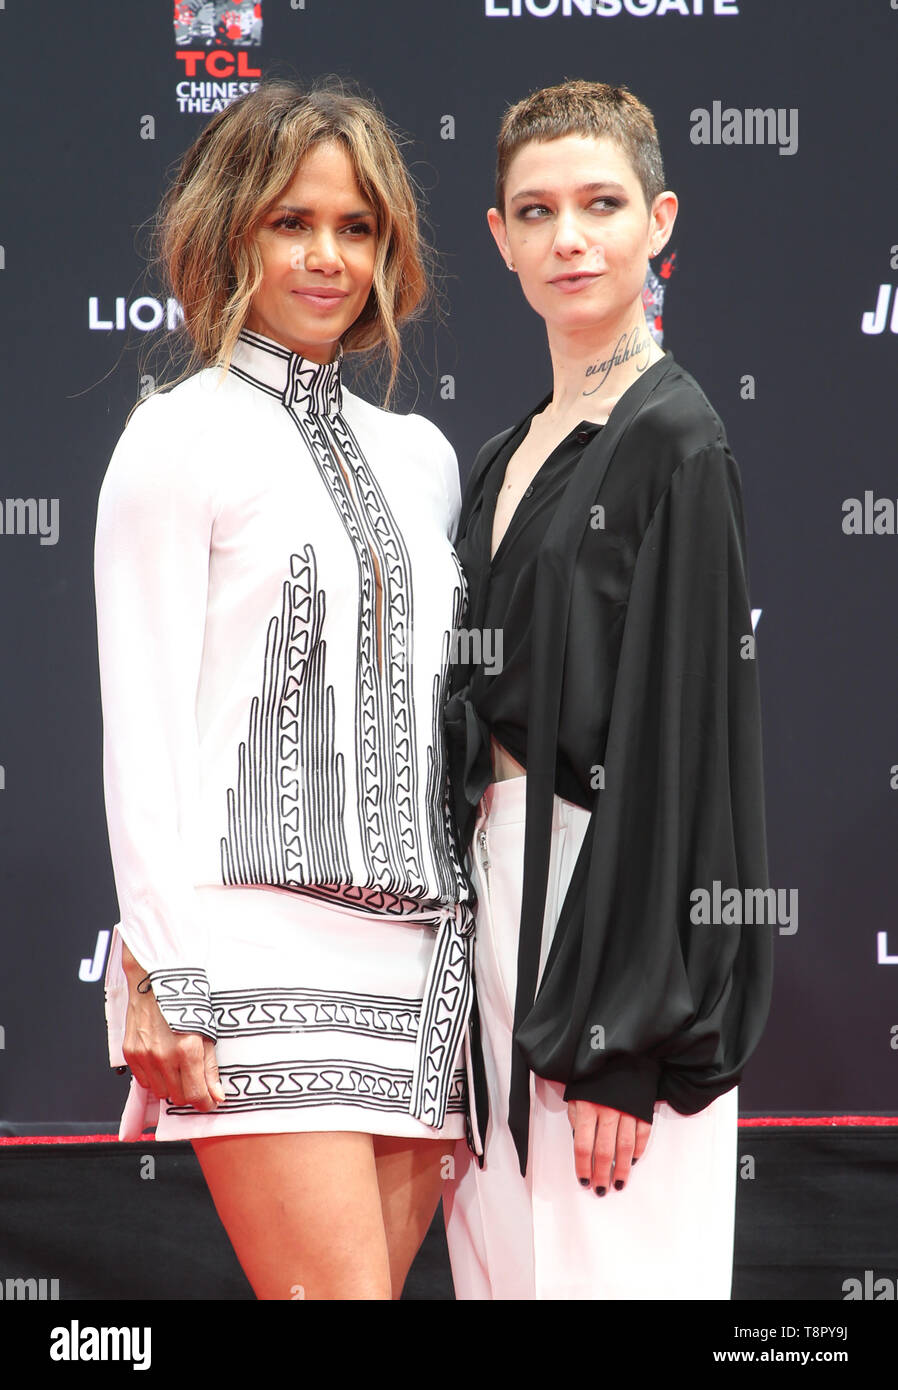 Hollywood, Ca. 14th May, 2019. Halle Berry and Asia Kate Dillon at the Keanu Reeves Hand And Foot Print Ceremony at the TCL Chinese Theatre IMAX in Hollywood, California on May 14, 2019. Credit: Faye Sadou/Media Punch/Alamy Live News Stock Photo